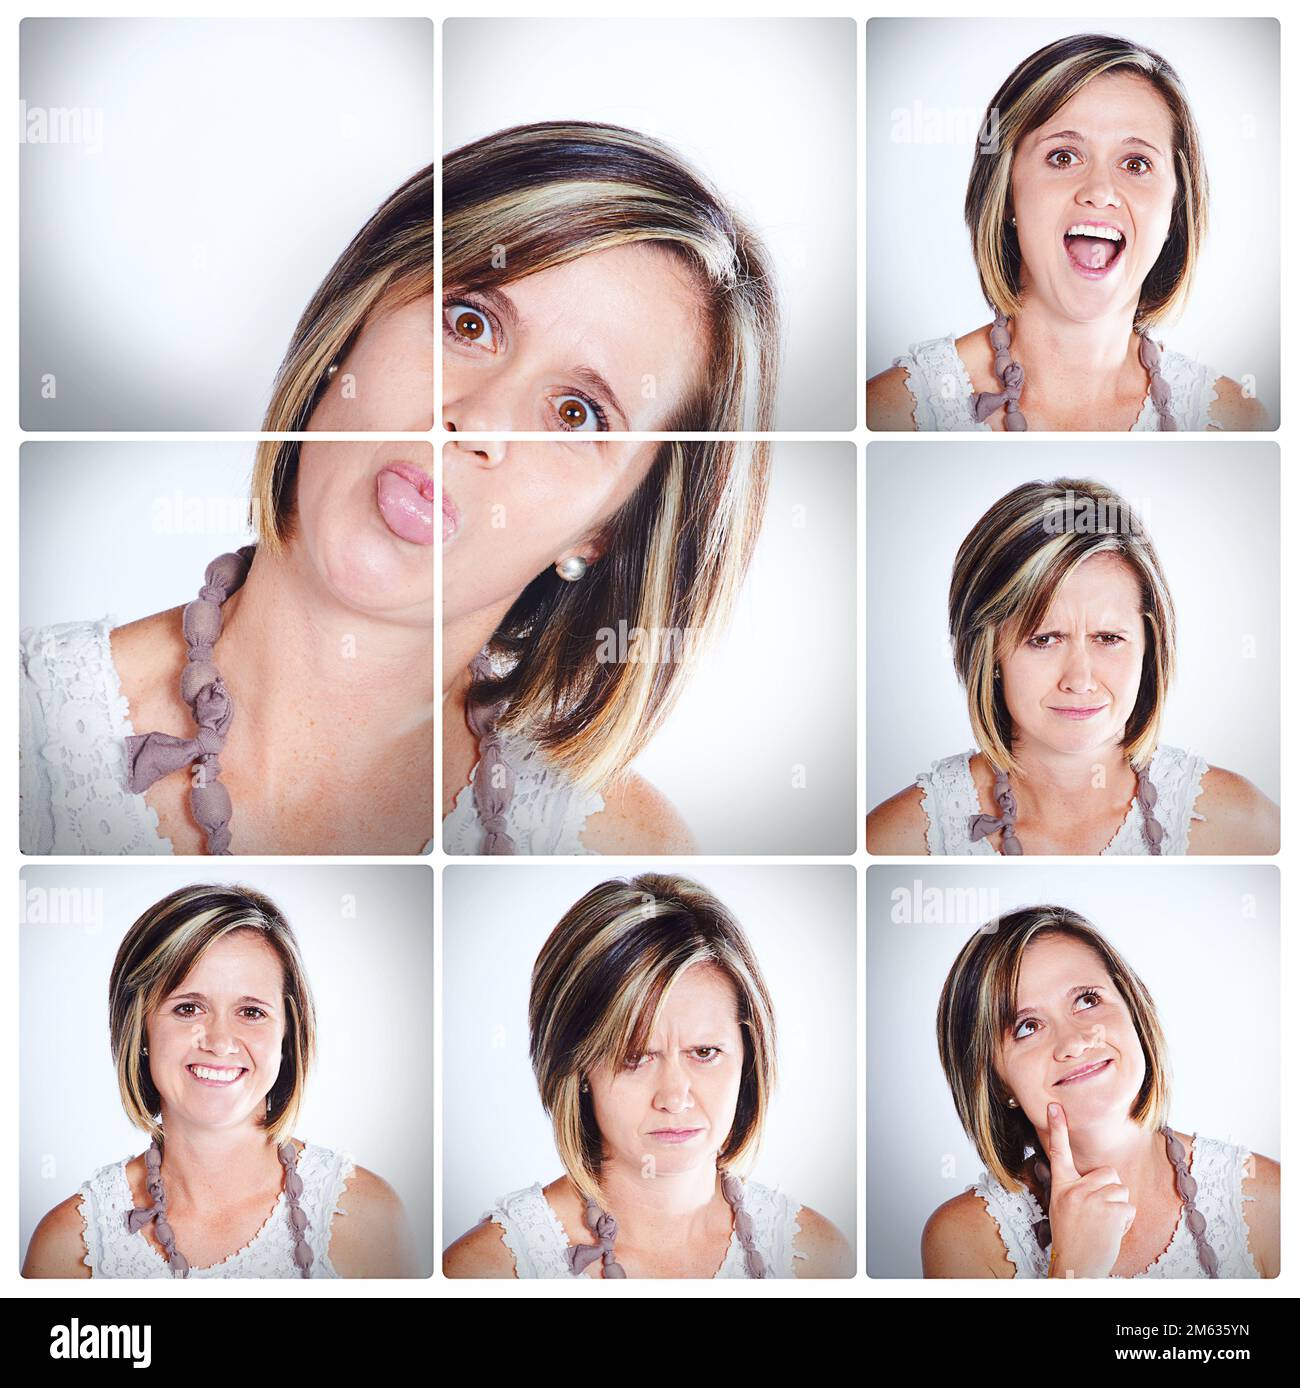 My many moods. Composite shot of a woman making various facial expressions. Stock Photo